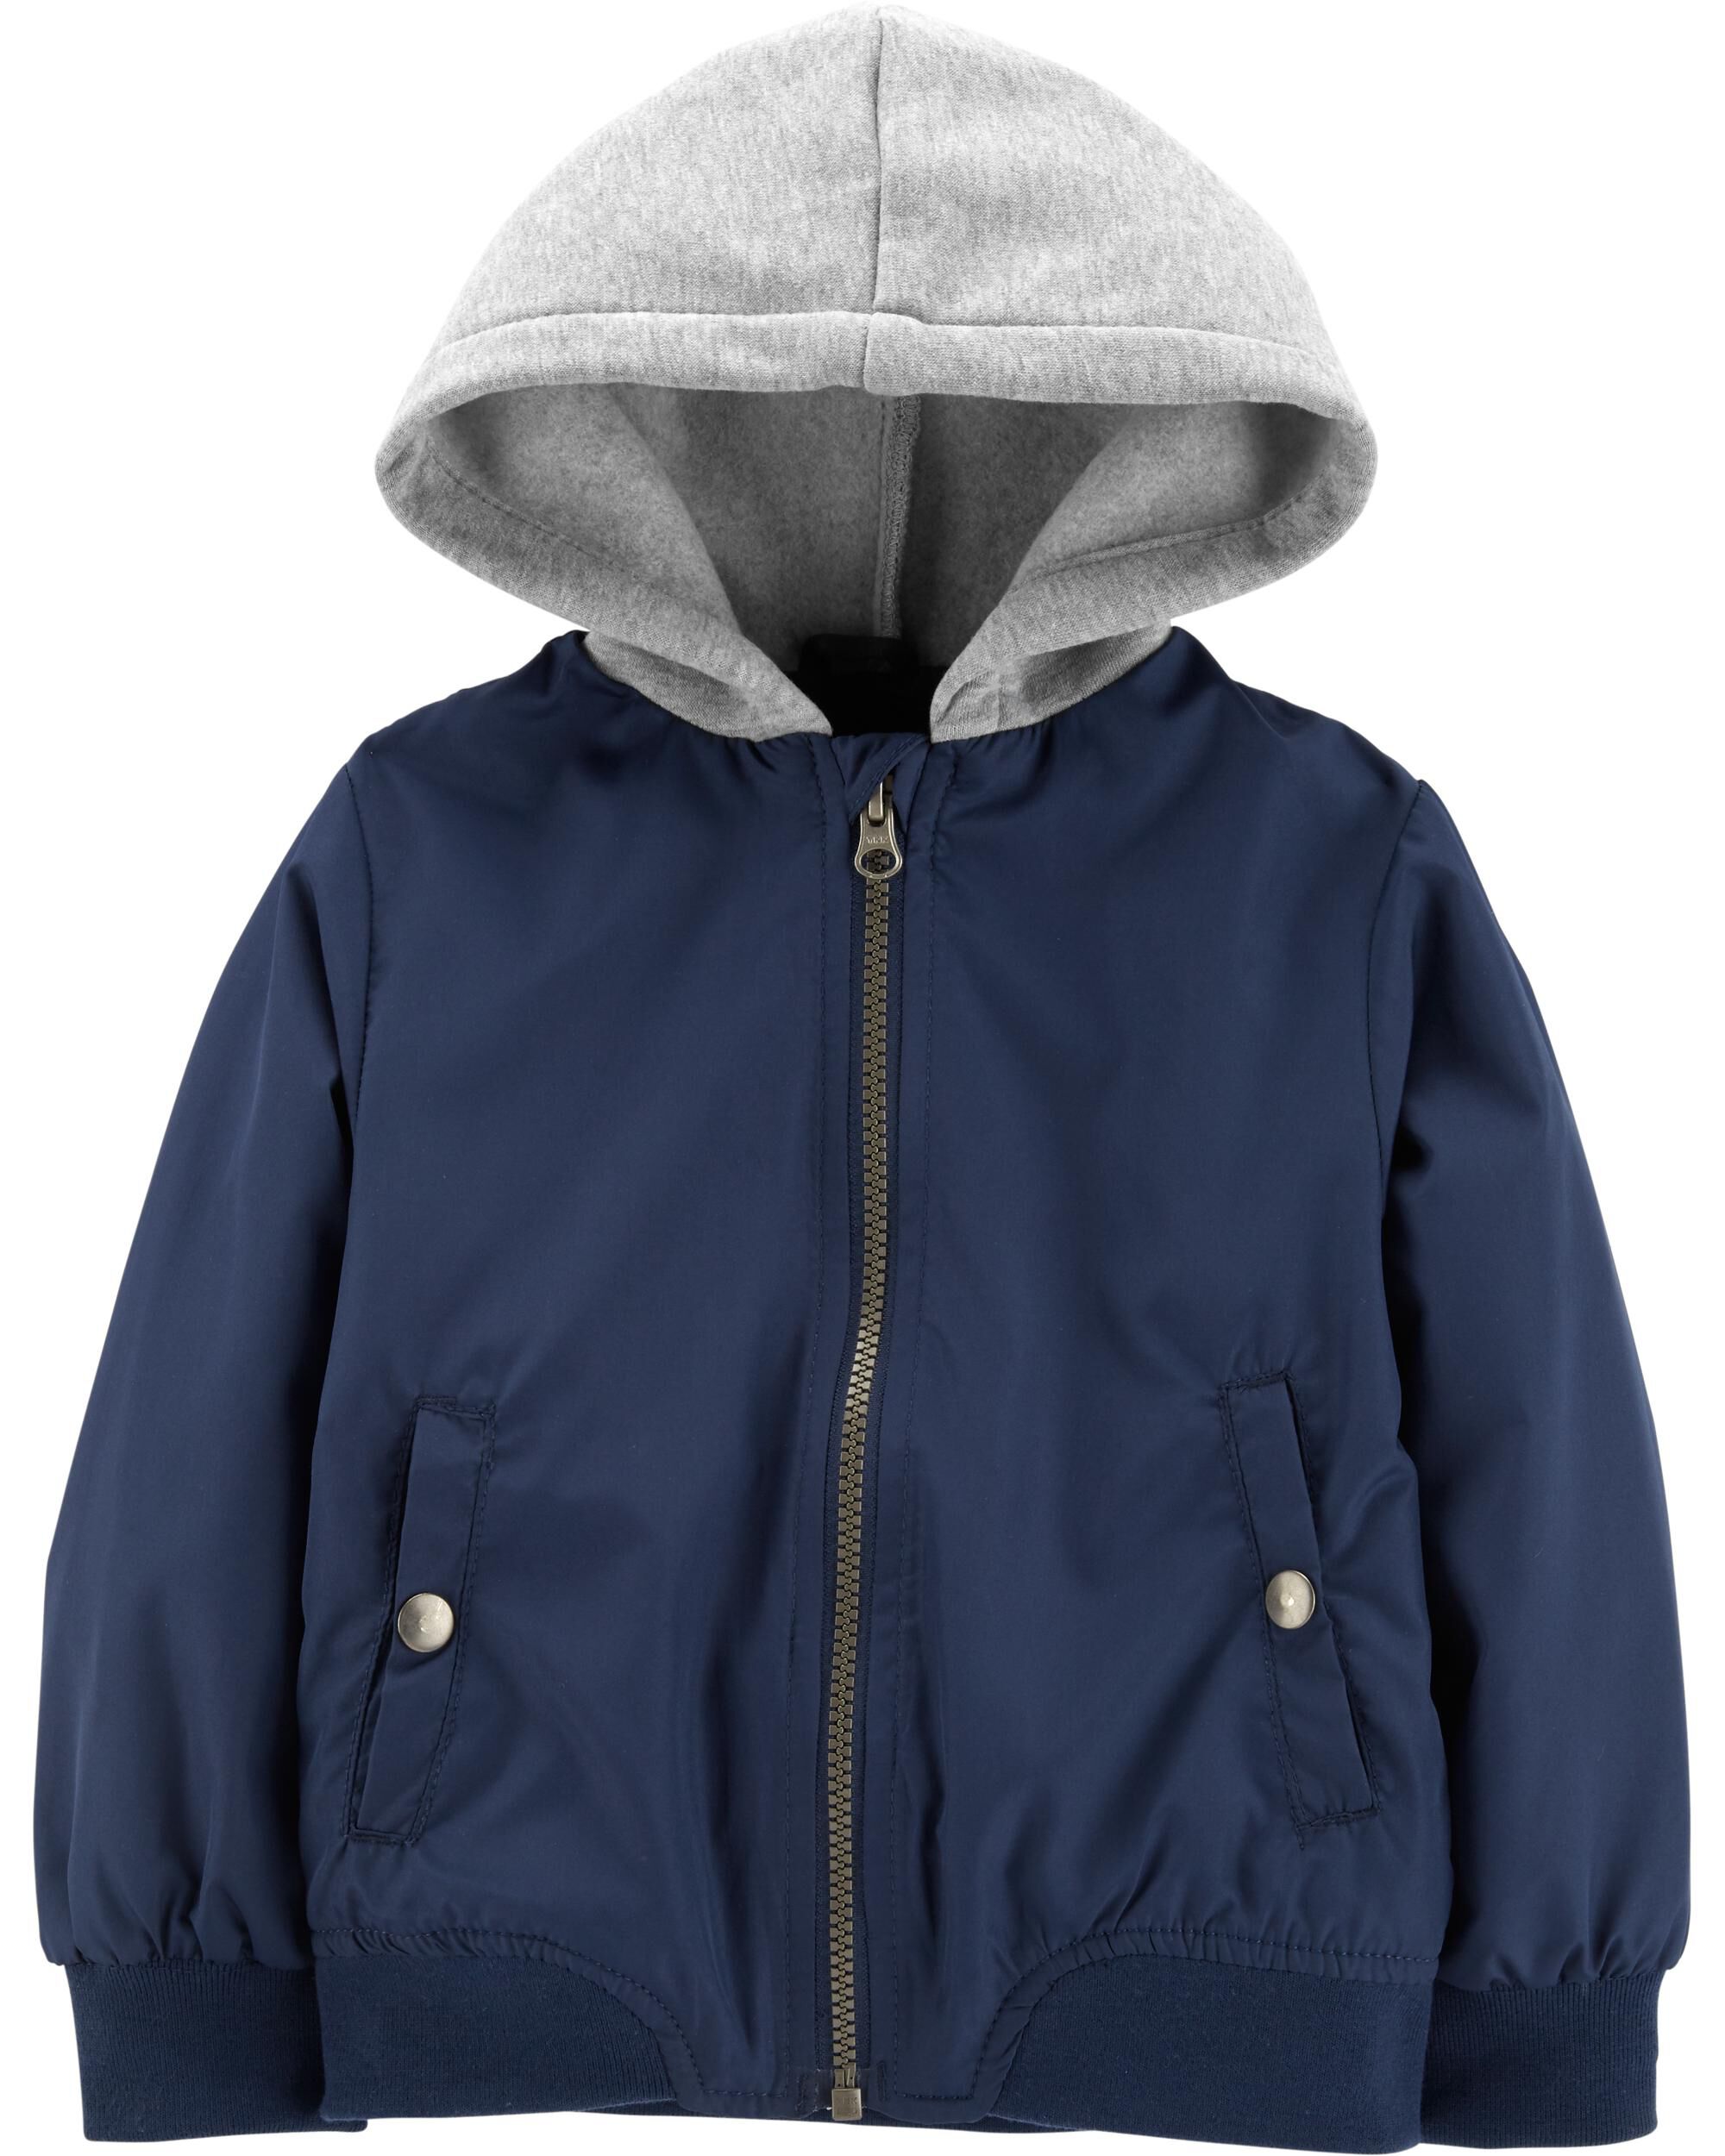 Carters Baby Boys Lightweight Hooded Bomber Jacket